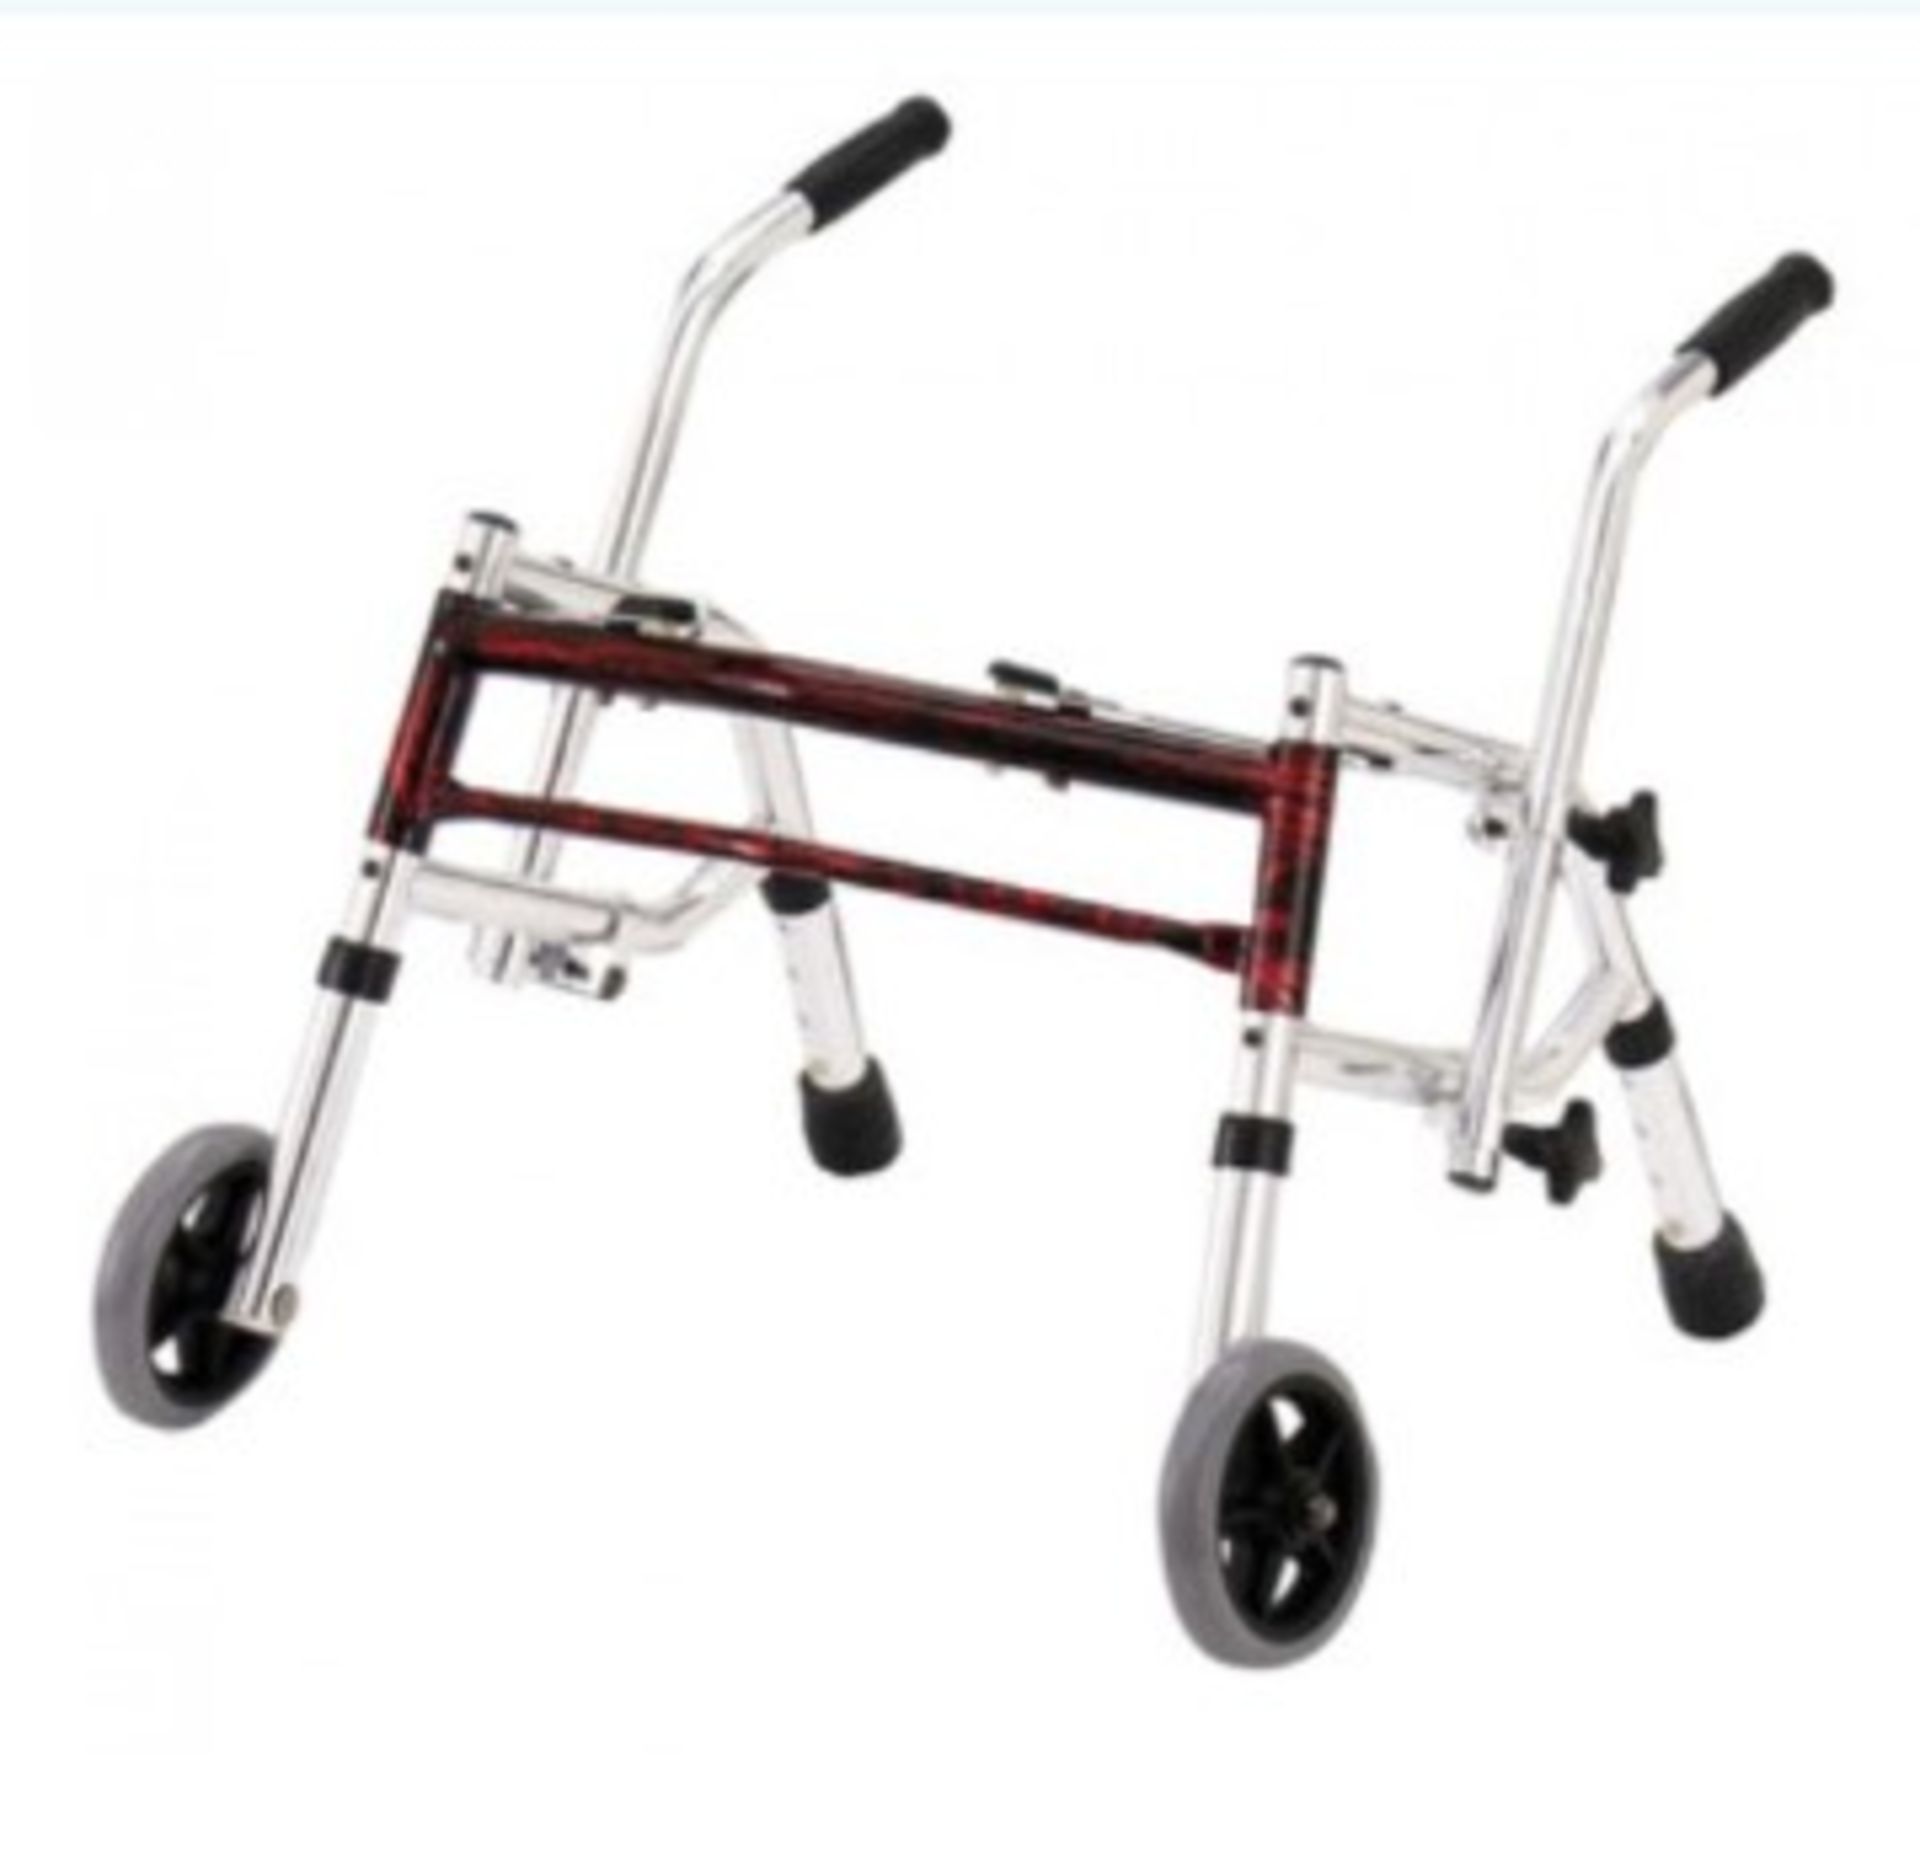 PEDIATRIC 10221-FRD-1 2-BUTTON GLIDER WALKER - FLAME RED - Image 2 of 2